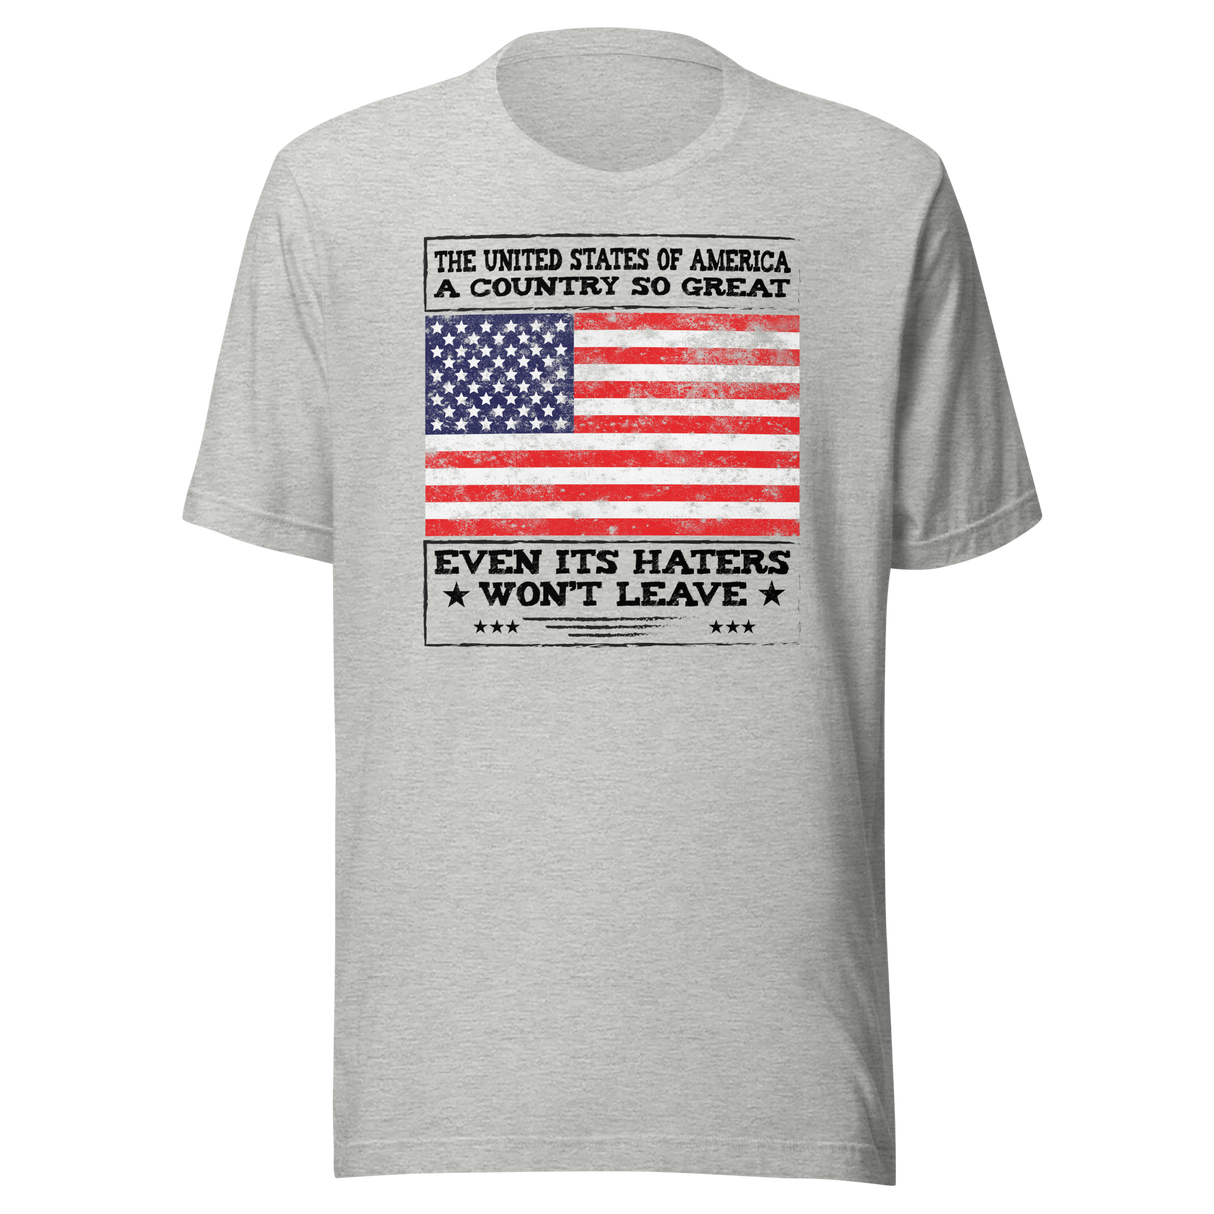 the-united-states-of-america-a-country-so-great-even-its-haters-wont-leave-politics-tee-politics-t-shirt-united-states-tee-patriotism-t-shirt-humor-tee#color_athletic-heather